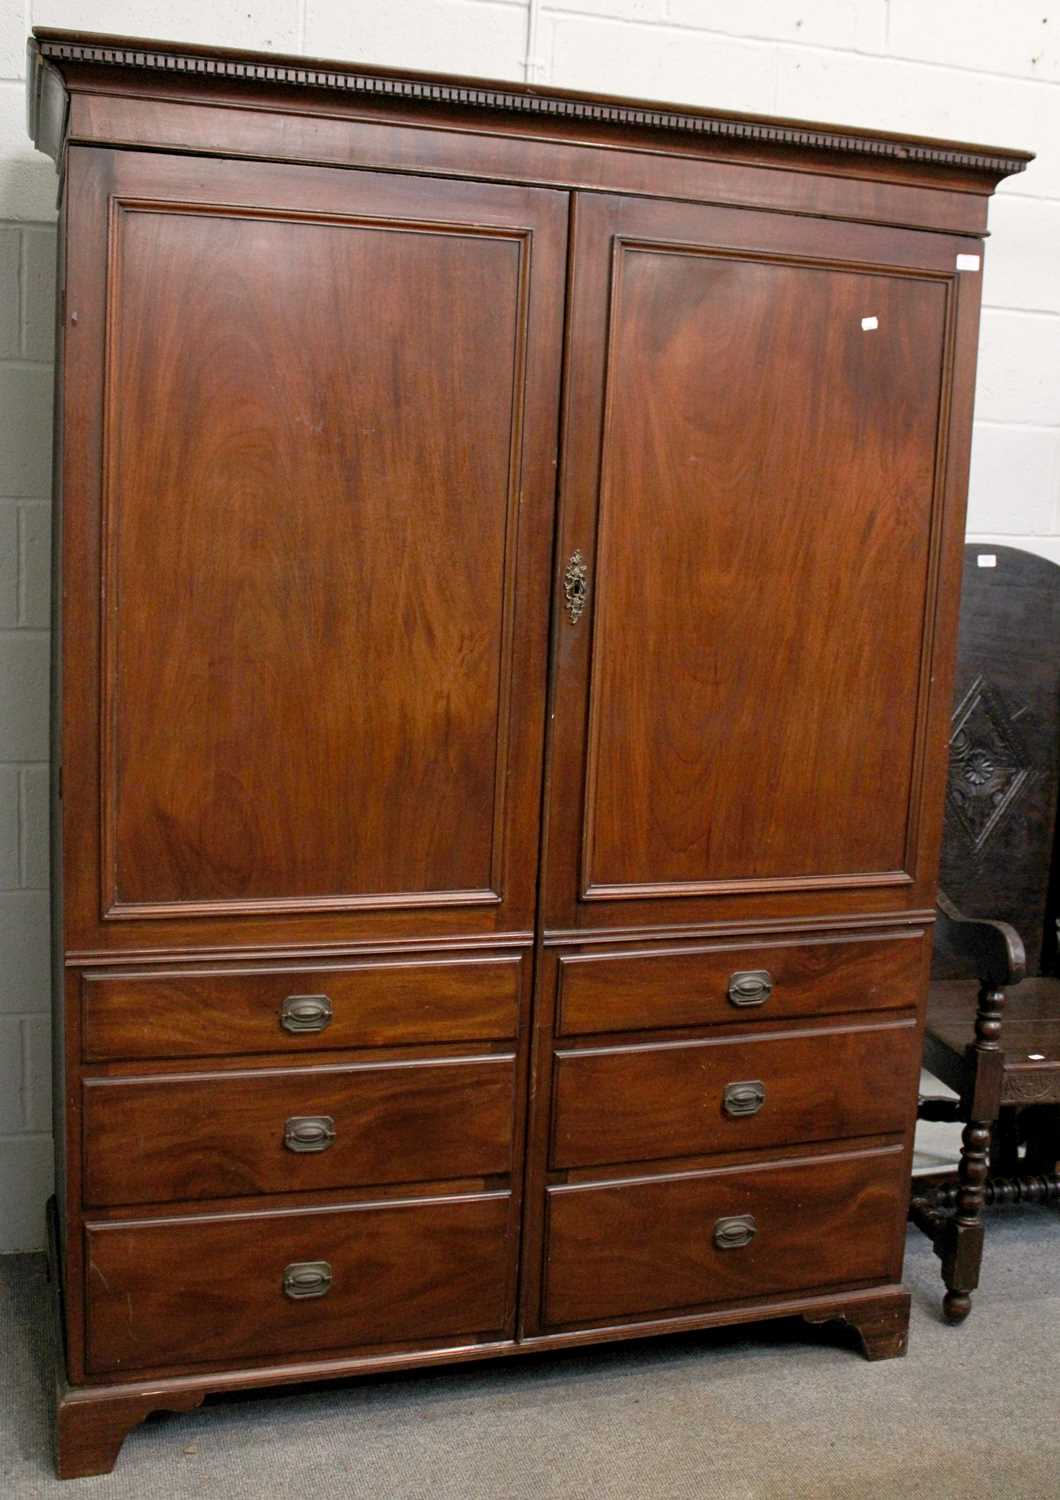 A 19th Century Mahogany Two Door Dwarf Wardrobe, 132cm by 53cm by 174cm; together with another two - Image 2 of 3